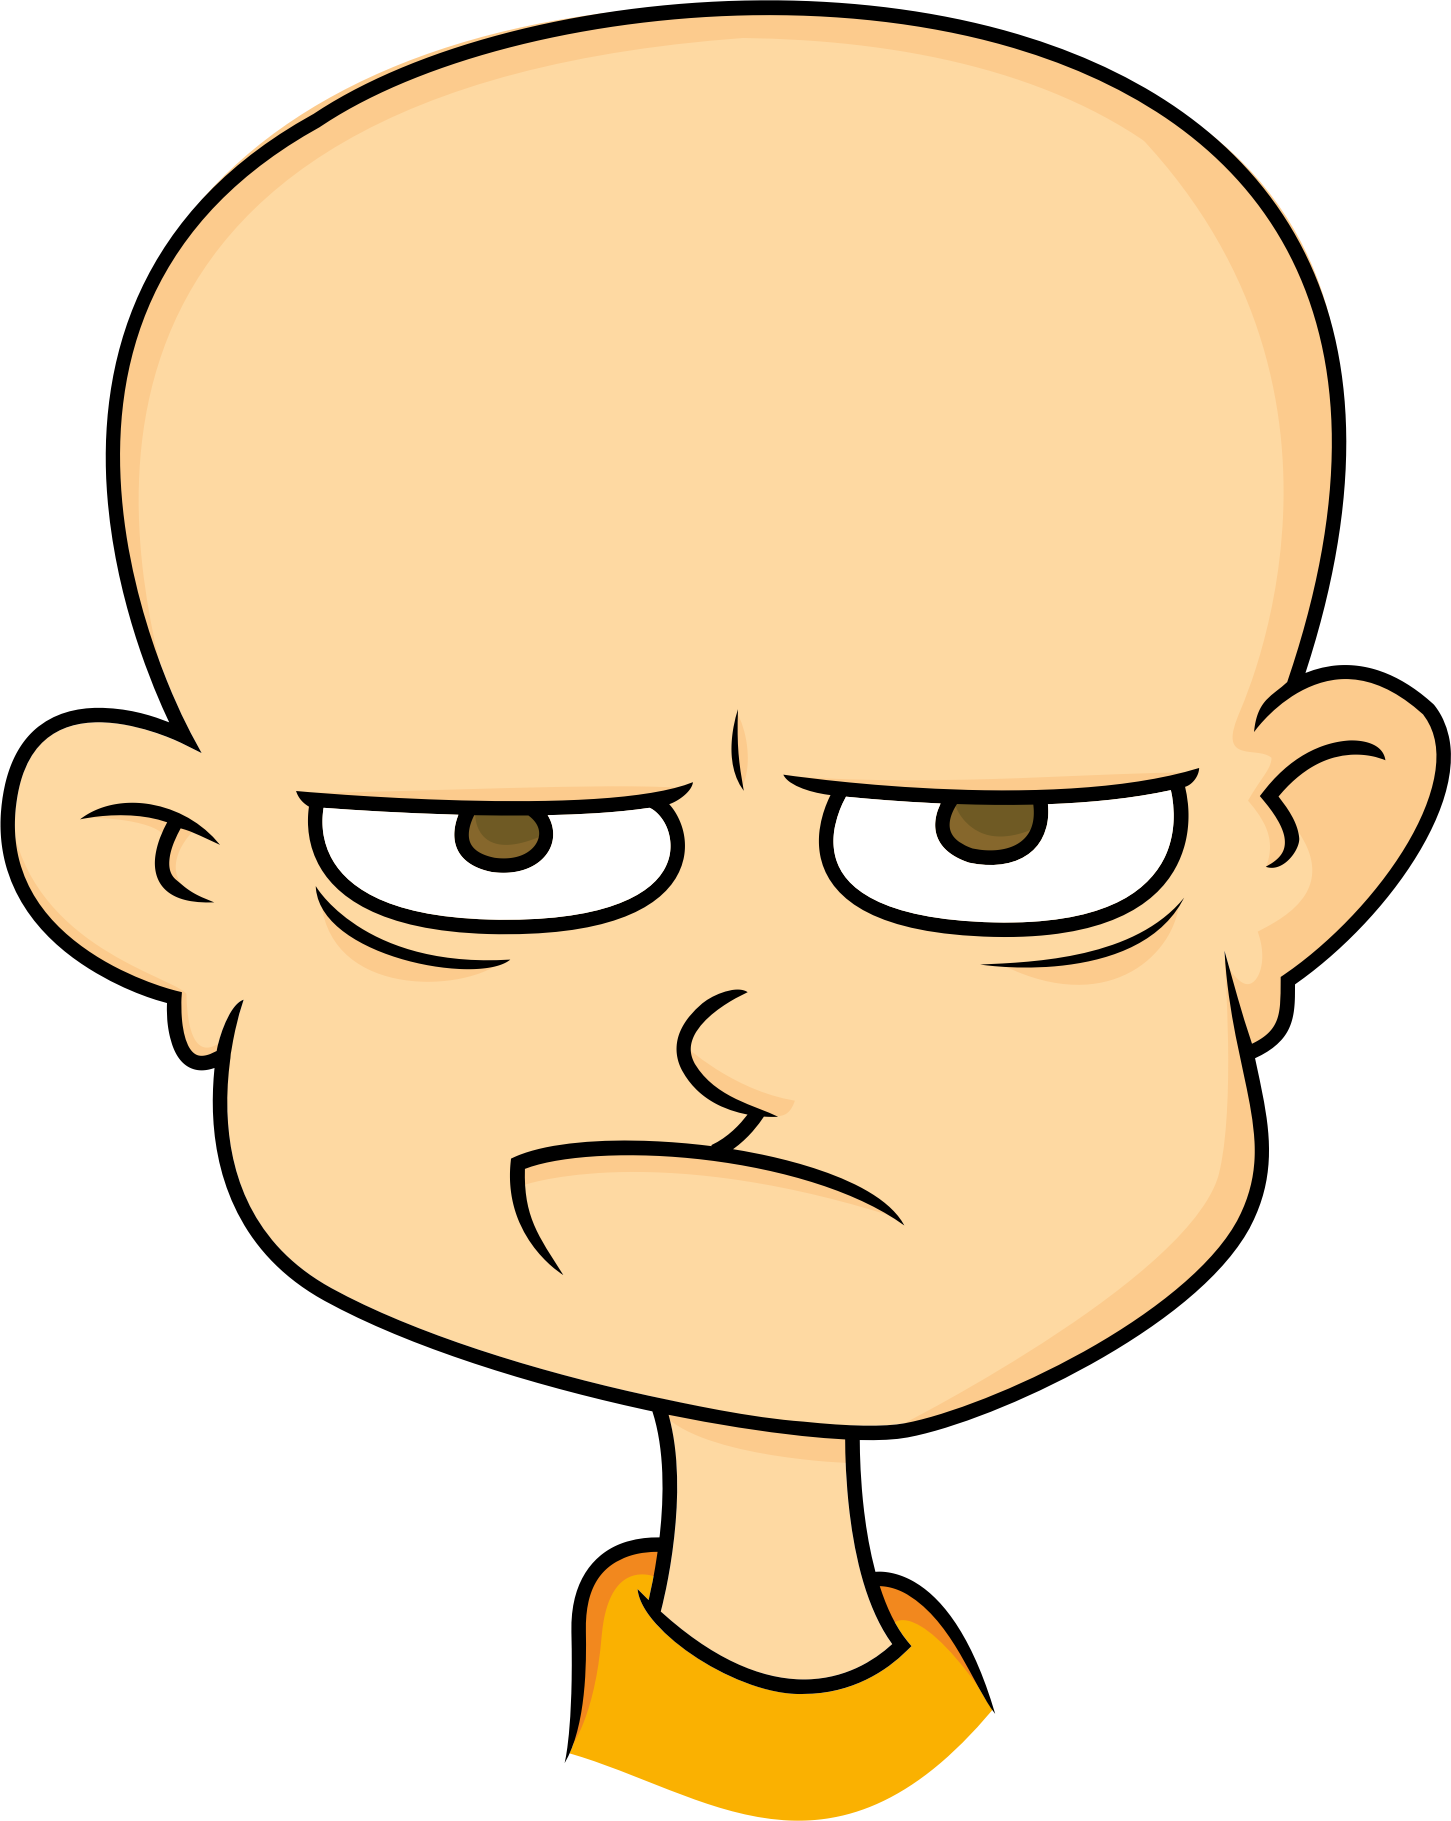 Angry faced person clipart